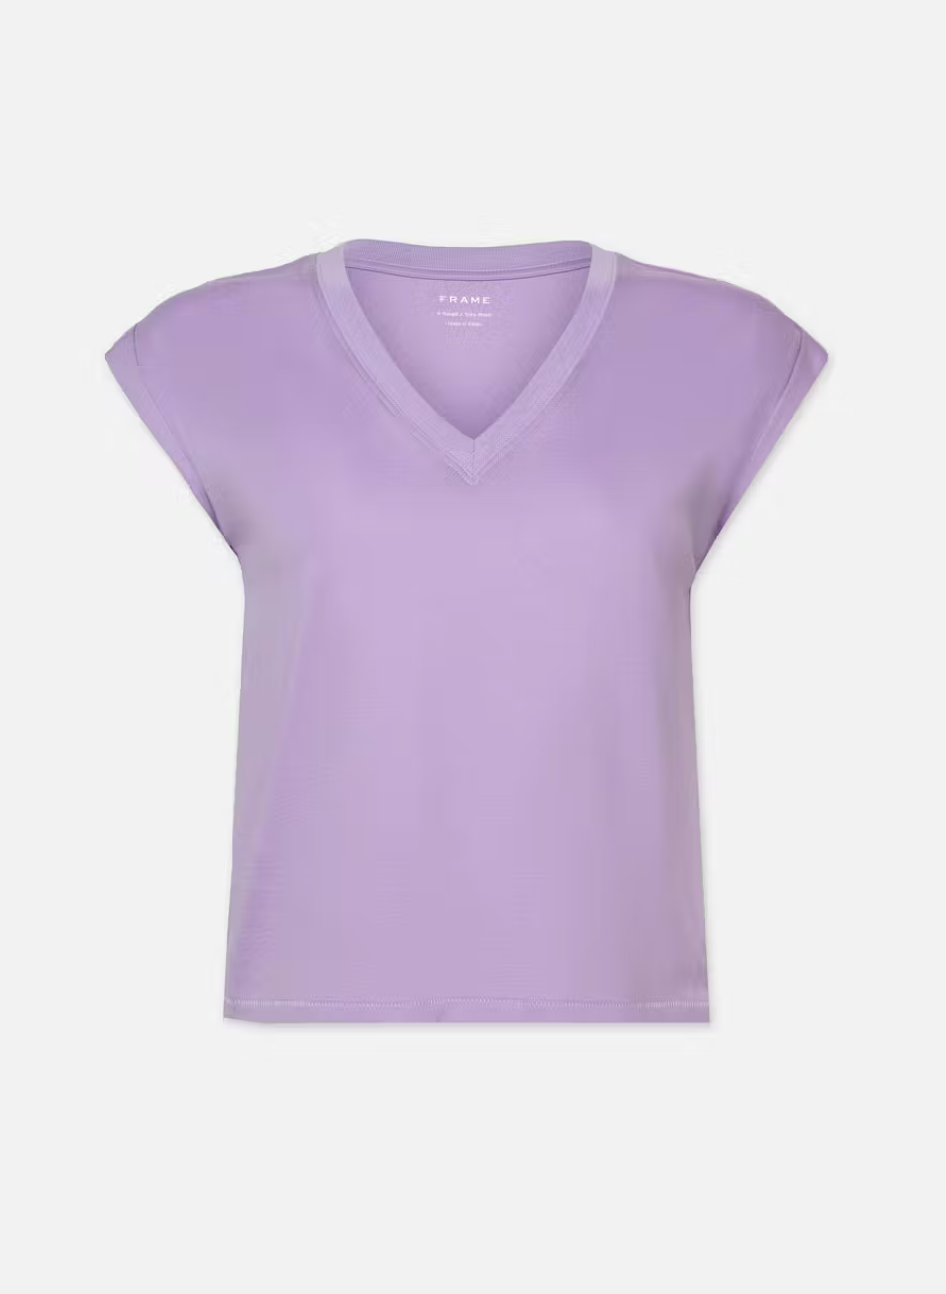 Easy v-neck tee in lilac